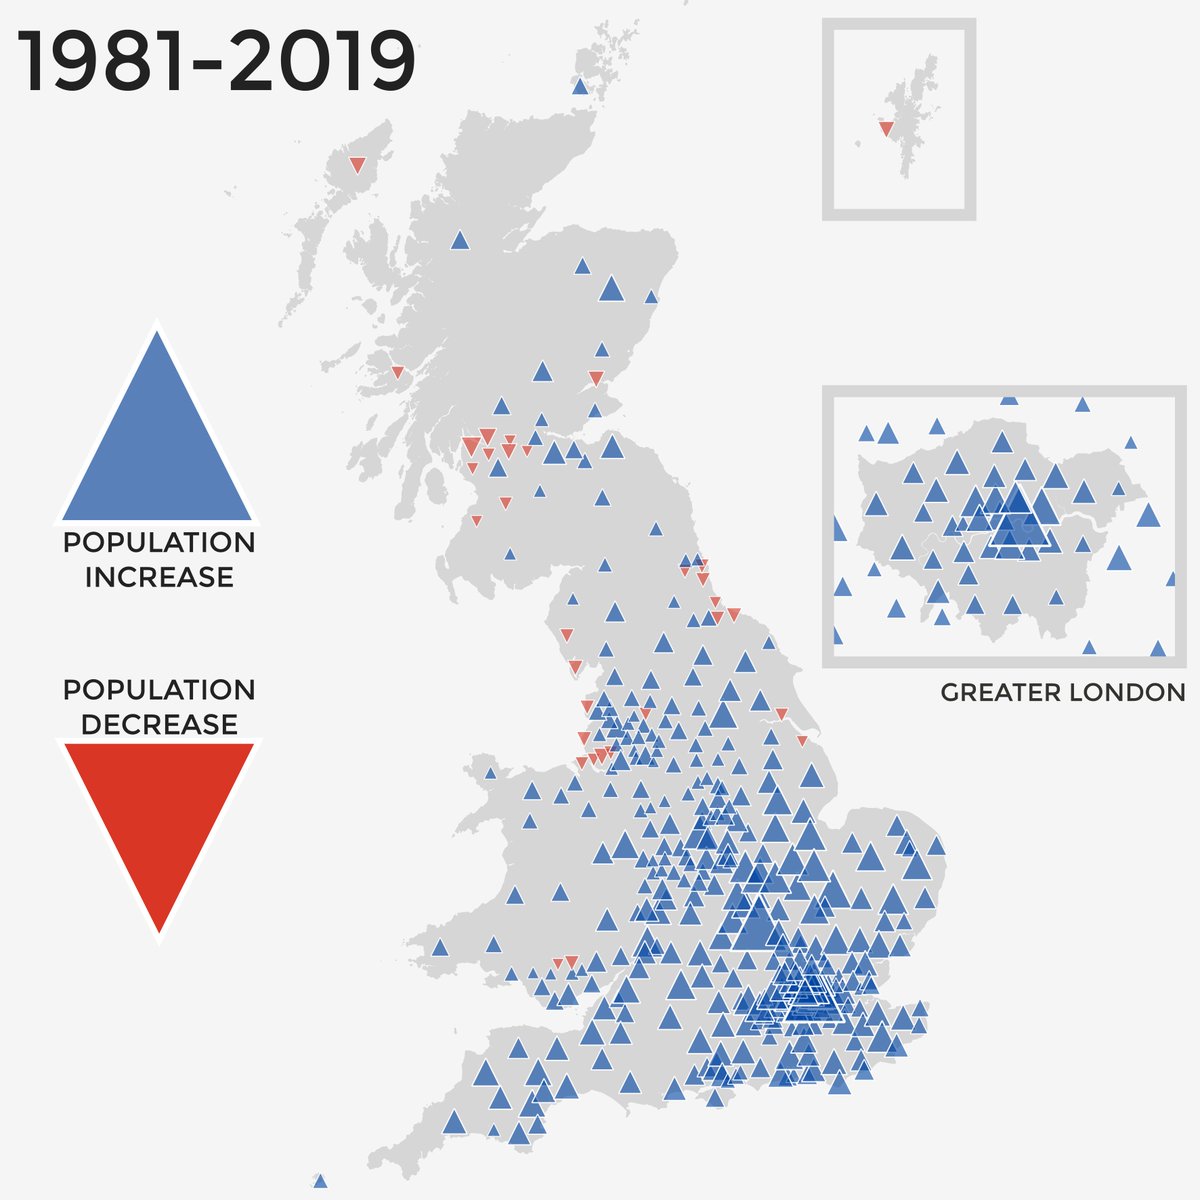 A few 'levelling-up' related maps today, after looking at recent ONS data release on local authority populations for each year 1981 to 2019 (based on 2020 boundaries)- simple overall population change map showing increases (336 out of 368 areas) and decreases (32 areas)